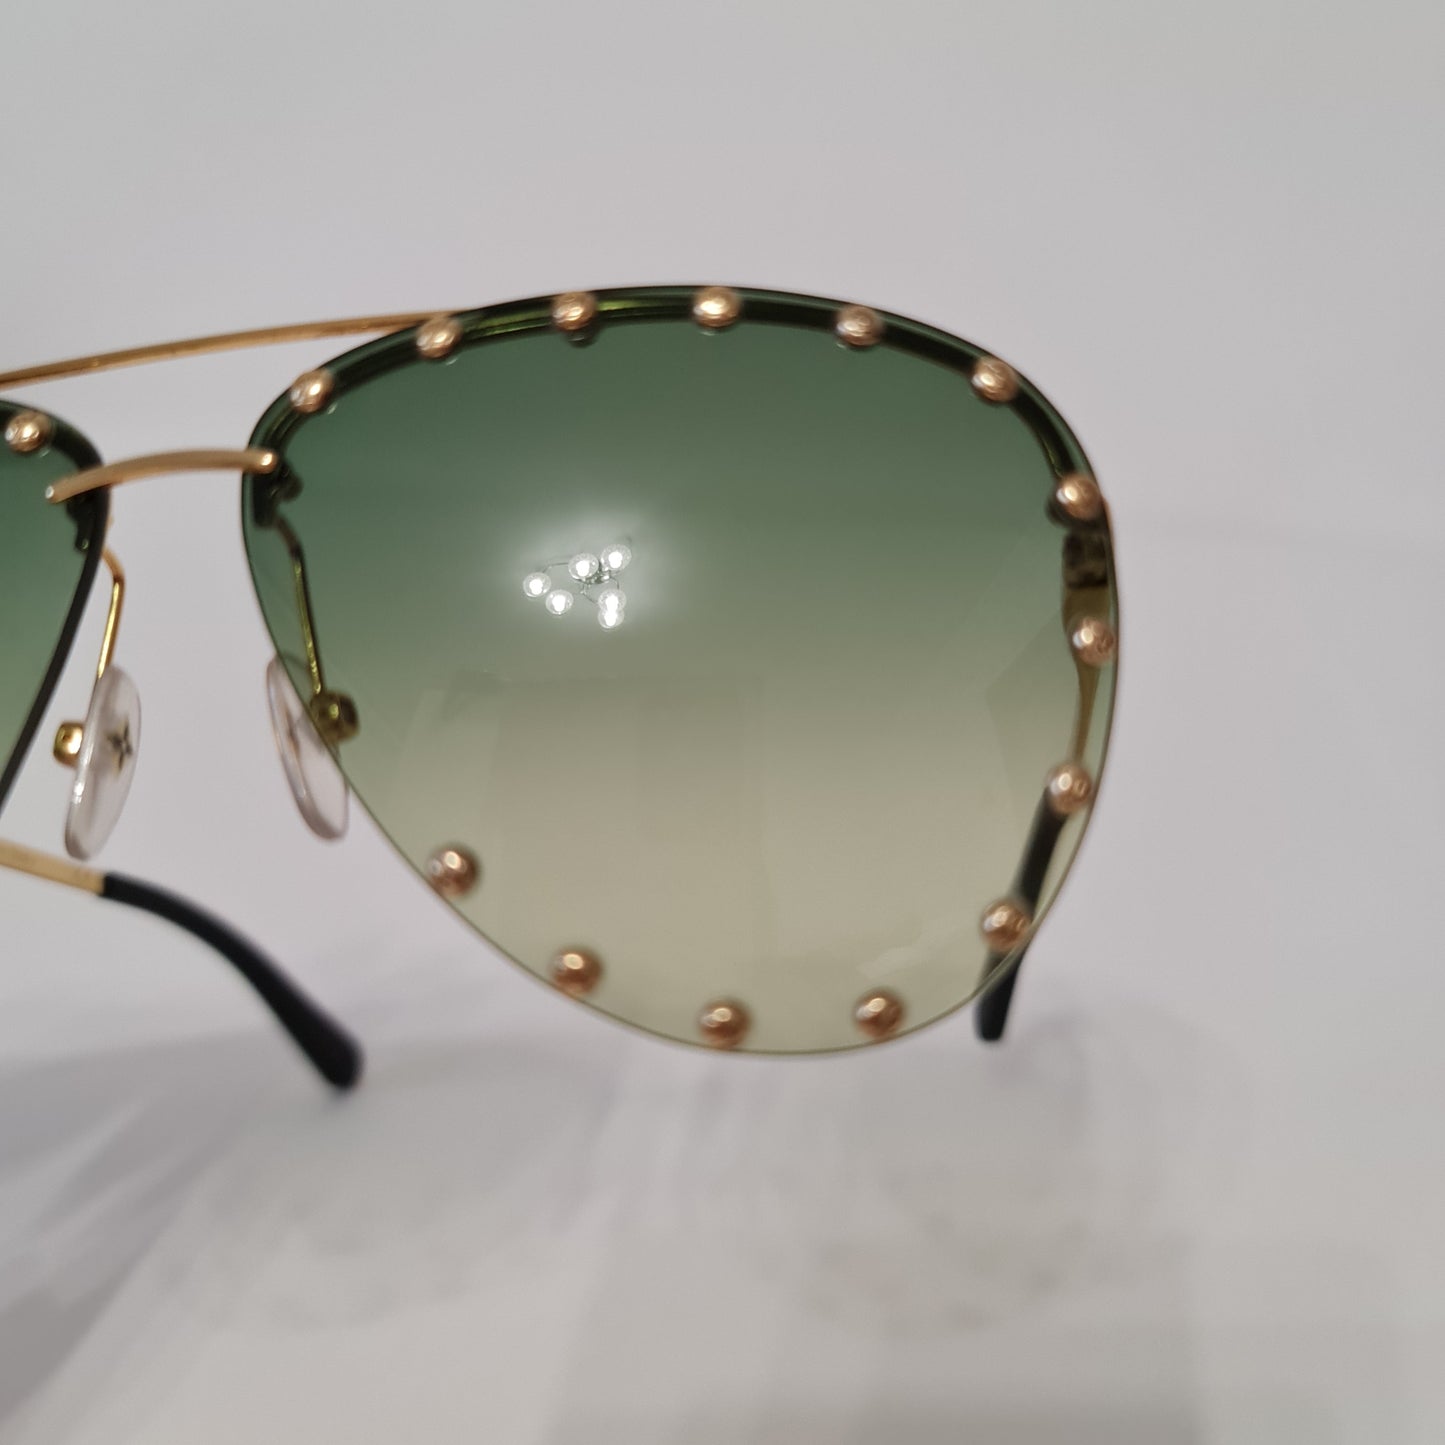 Load image into Gallery viewer, Louis Vuitton Louis Vuitton Green Olive Party Sunglasses (743) LVBagaholic
